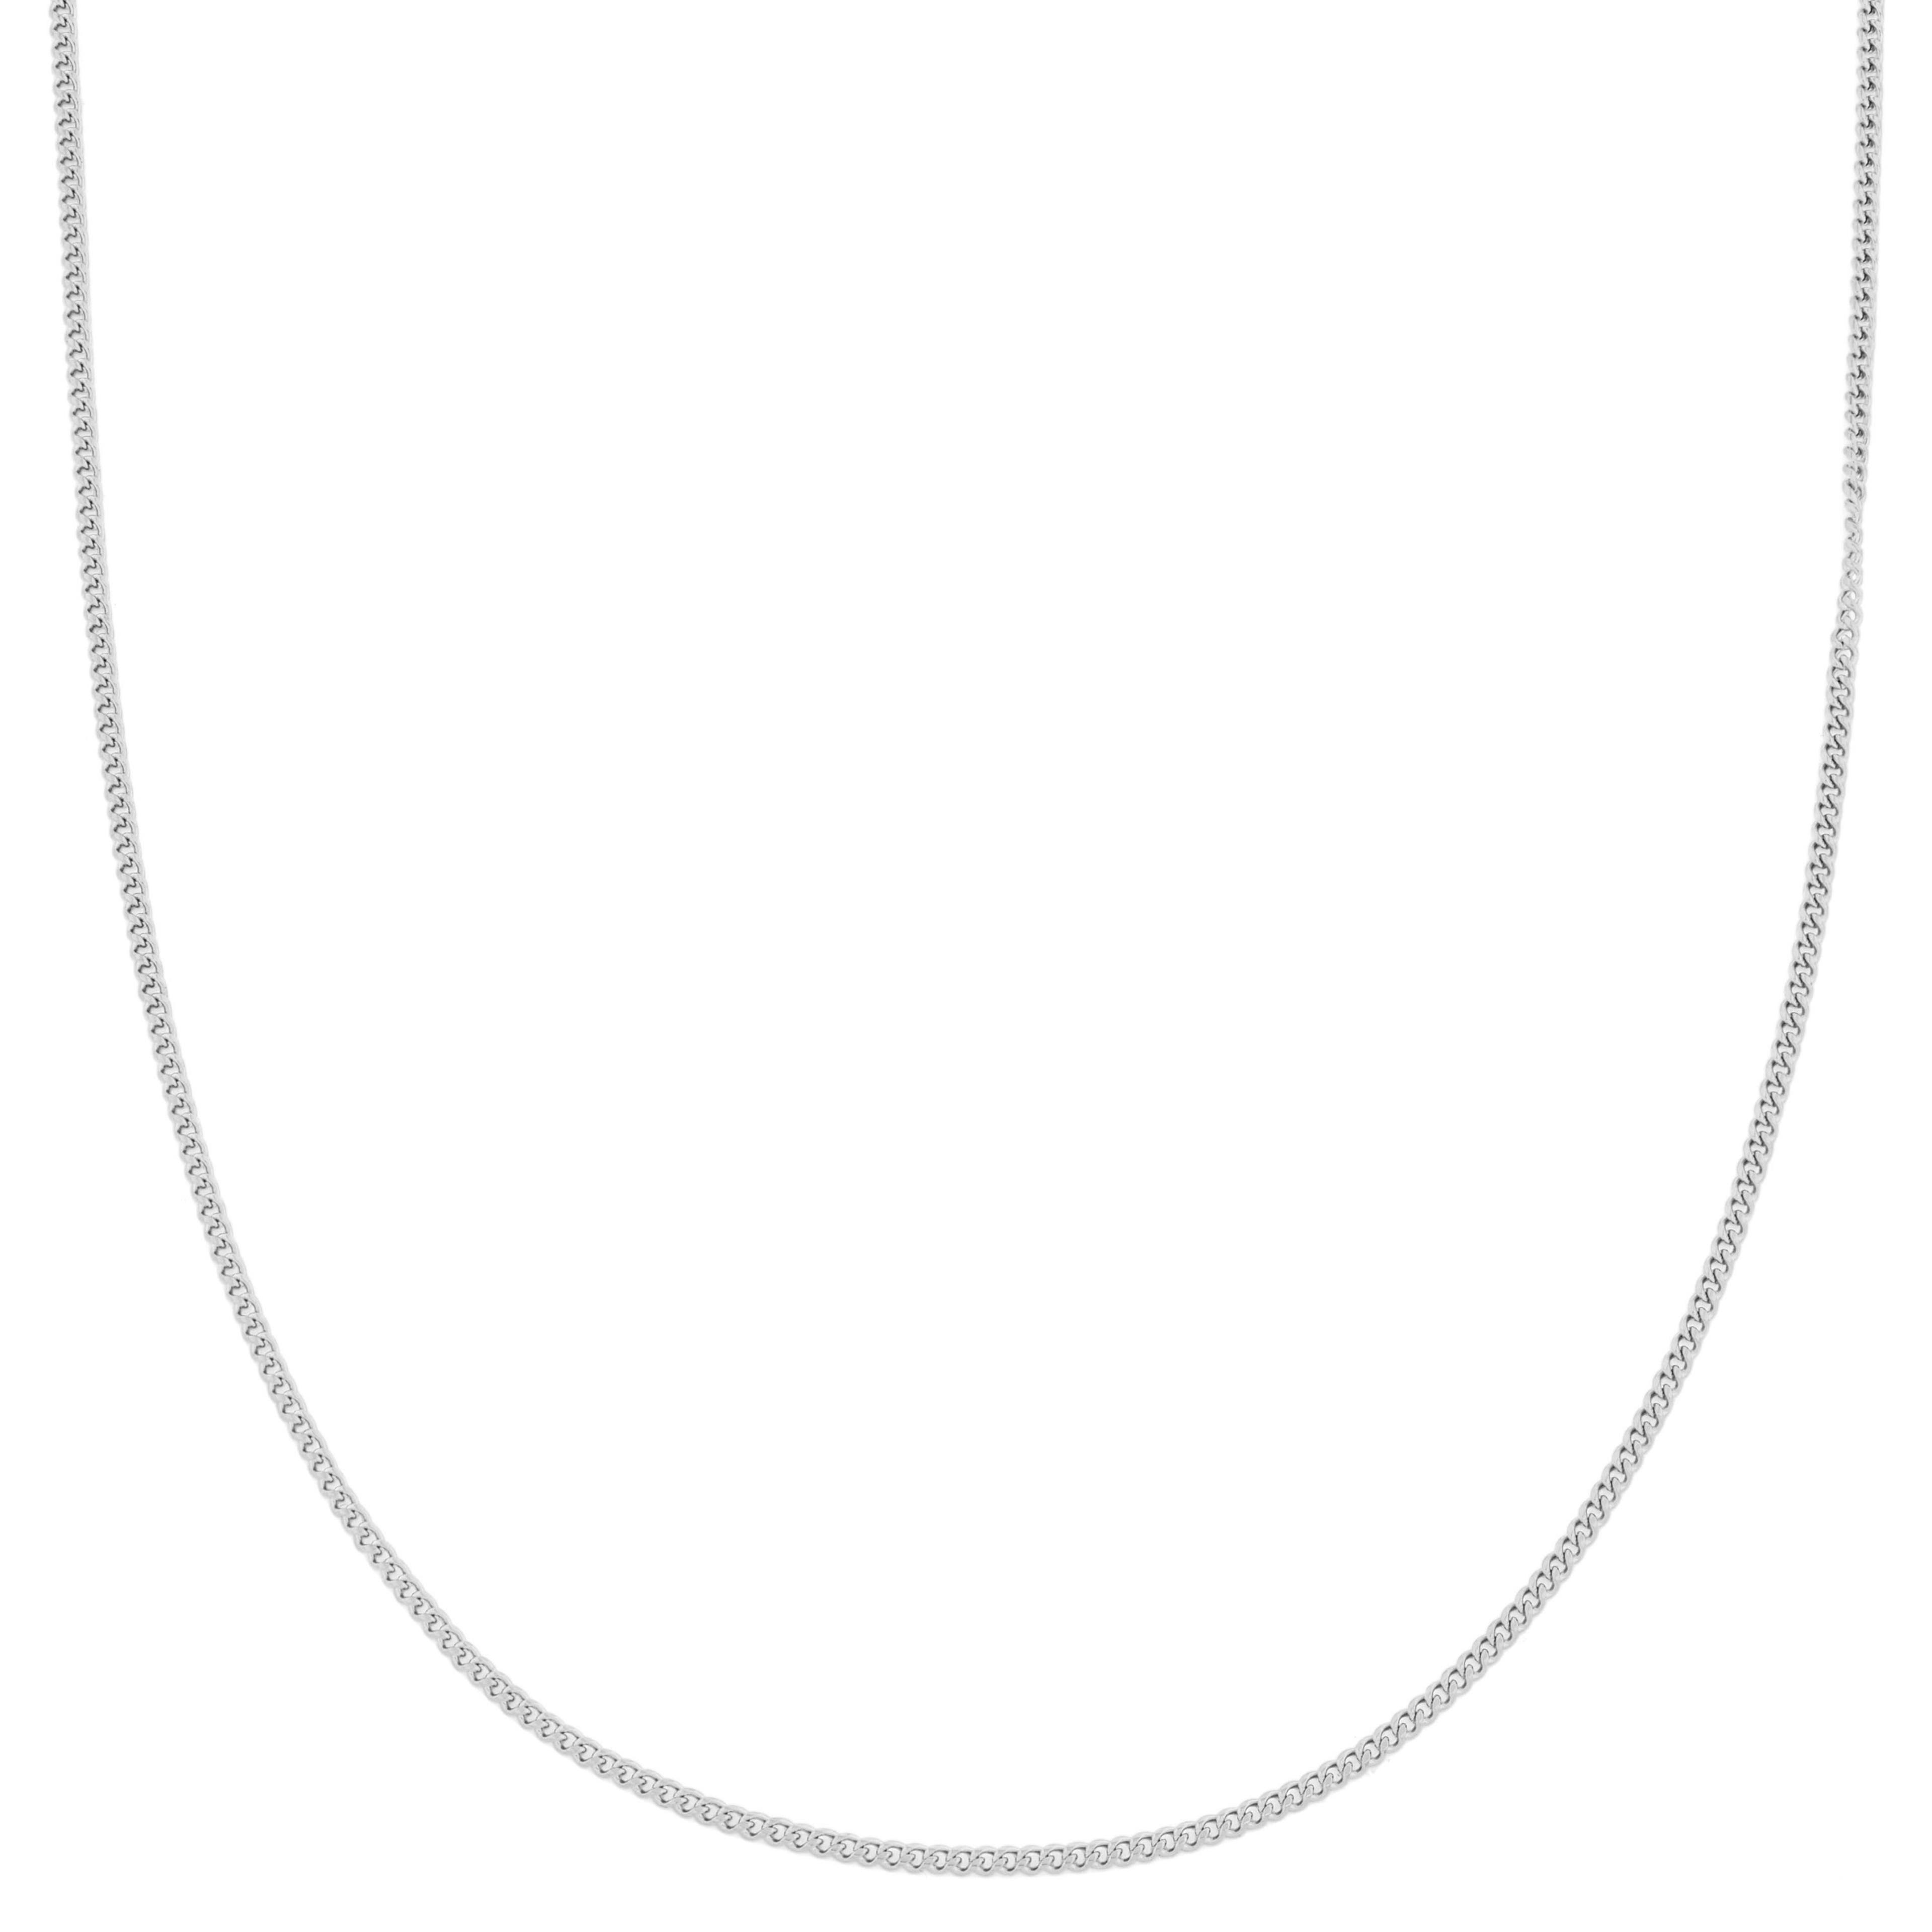 2 mm Silver-tone Chain Necklace